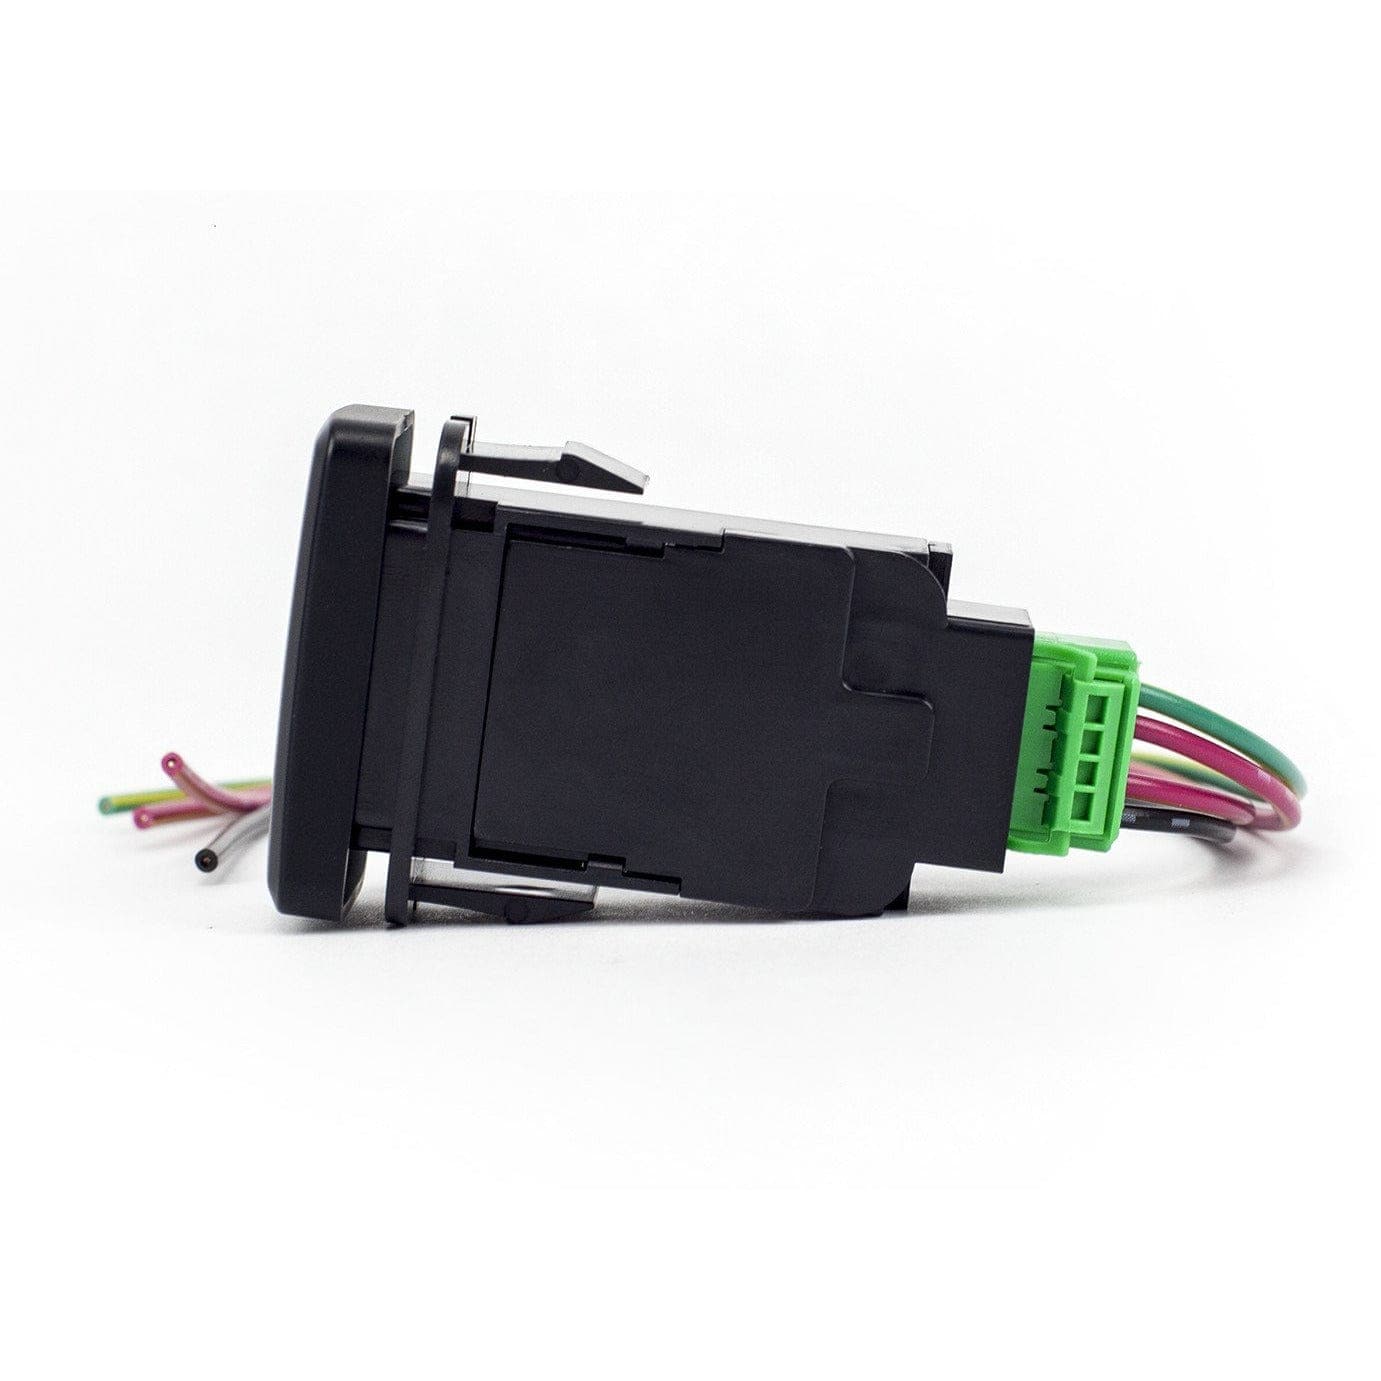 Cali Raised LED Switches Toyota OEM Style "DITCH LIGHTS" Switch